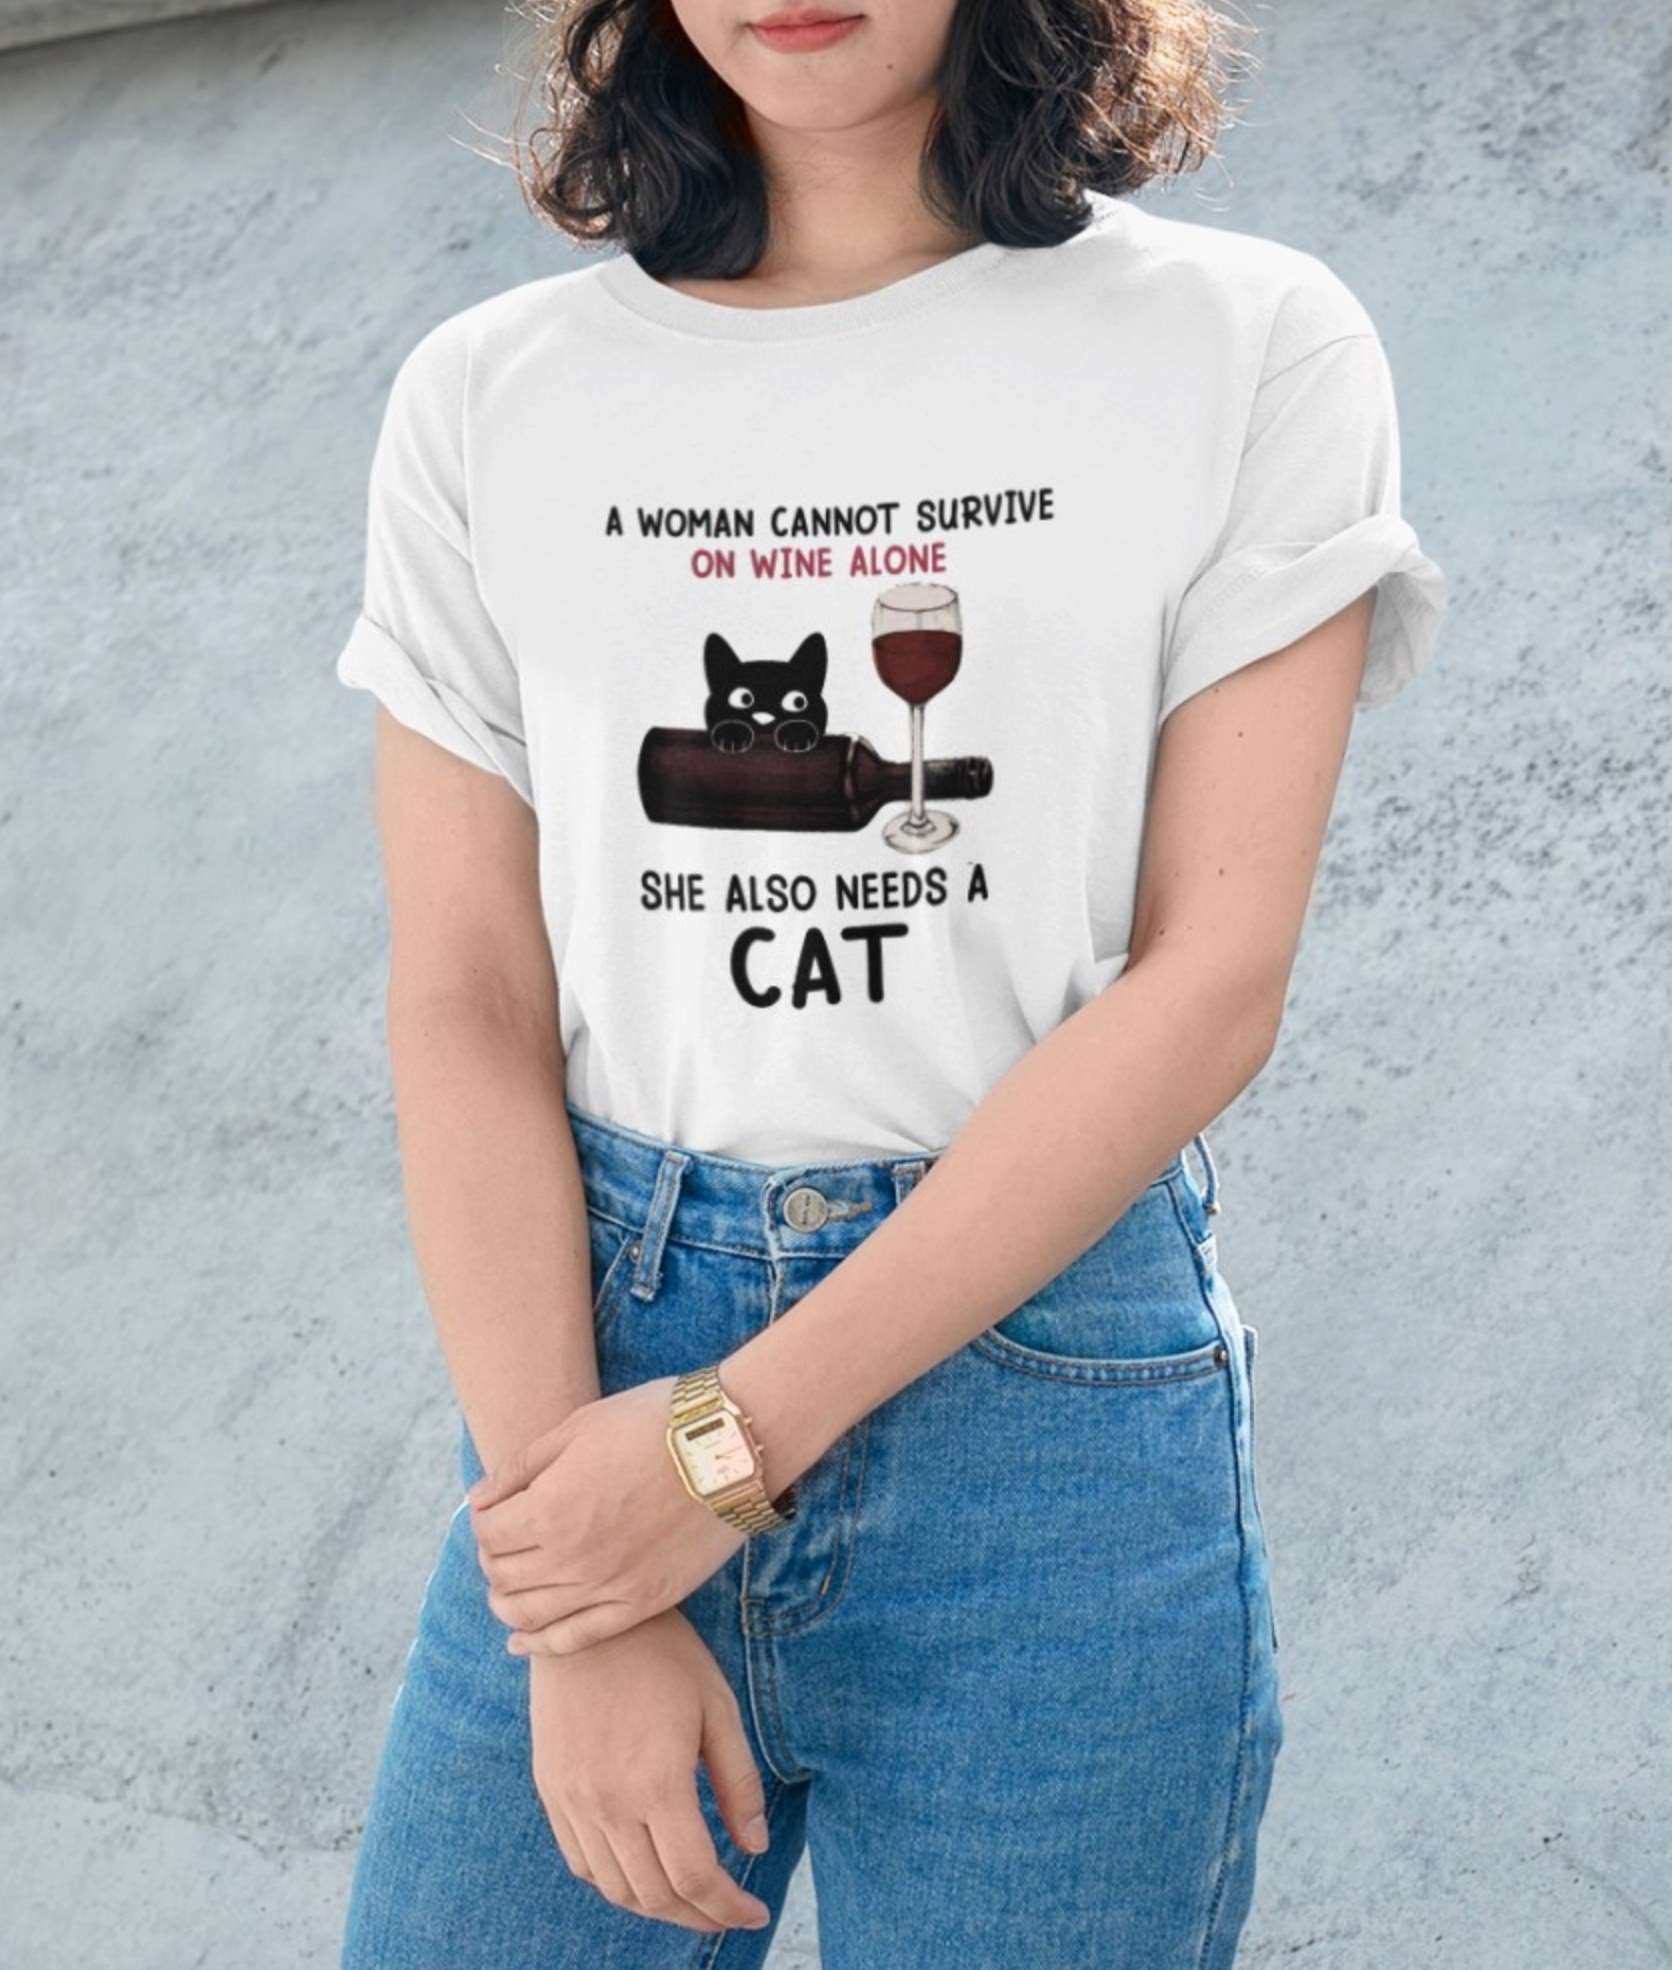 A woman cannot survive on wine alone she also needs a cat - Cat and wine, wine survivor